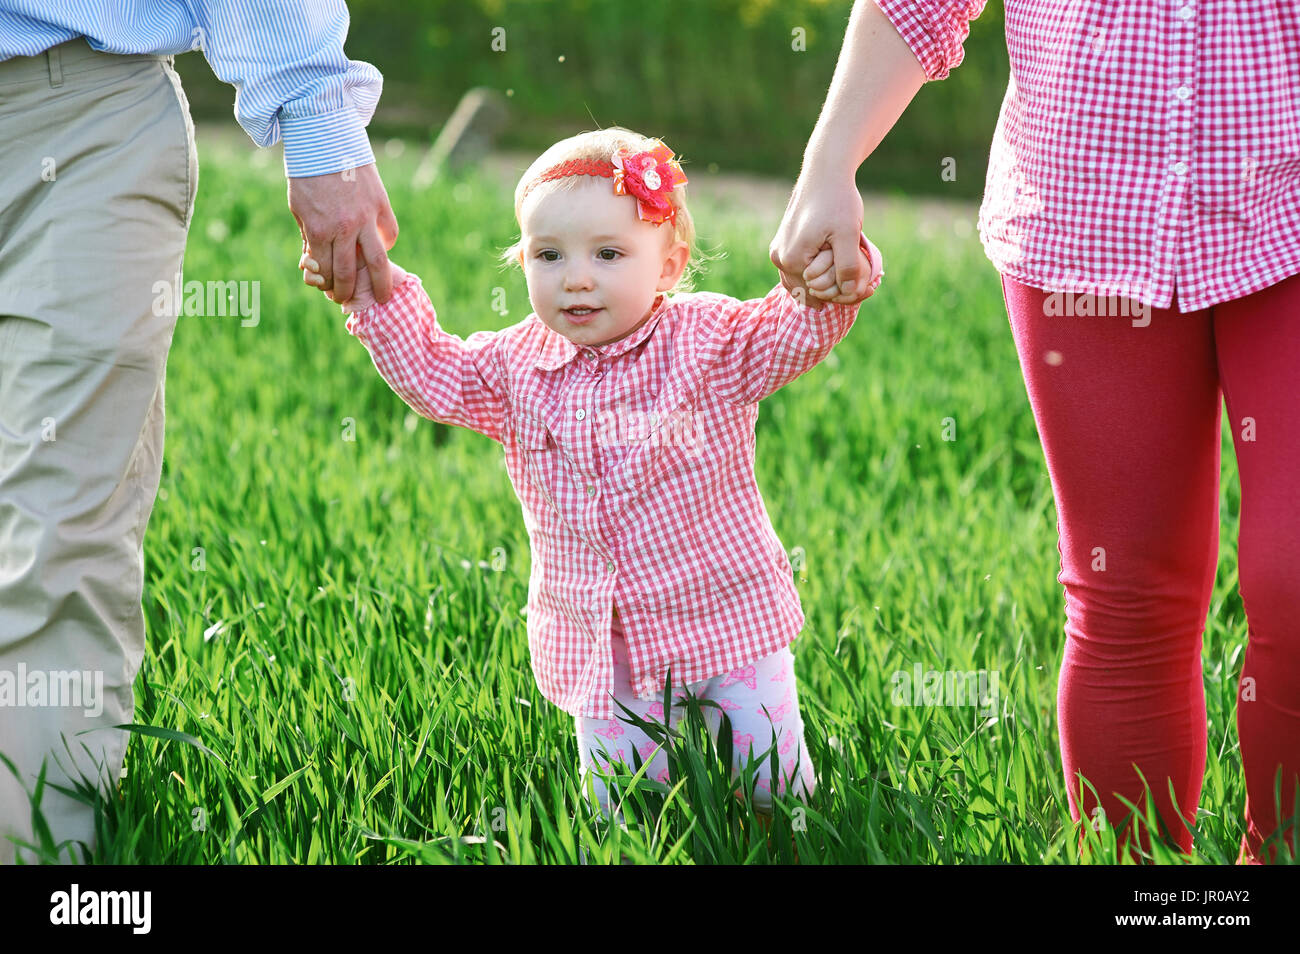 Mom and Dad and daughter are walking on the summer green field Stock Photo